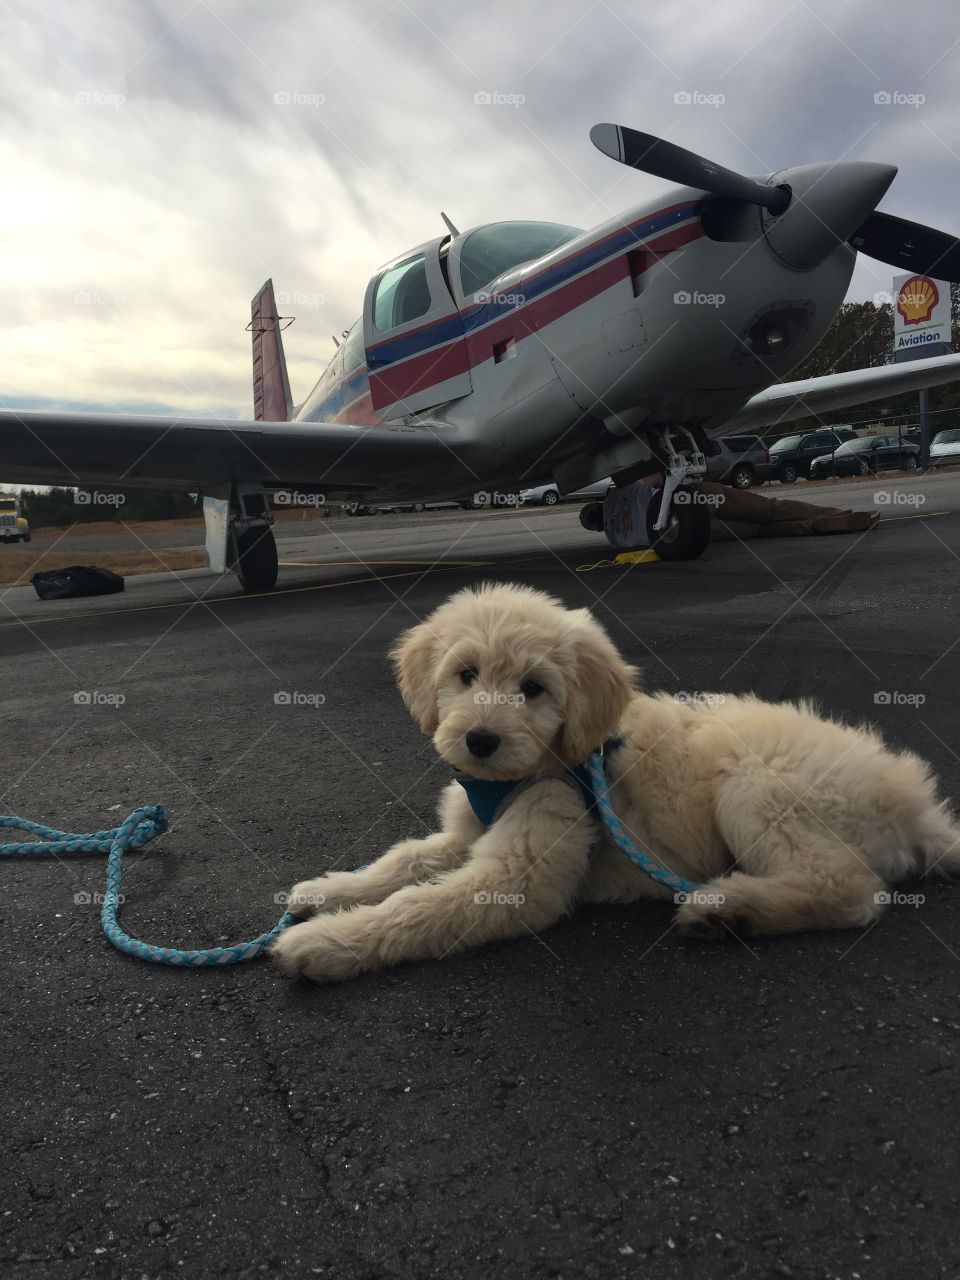 Puppy and plane